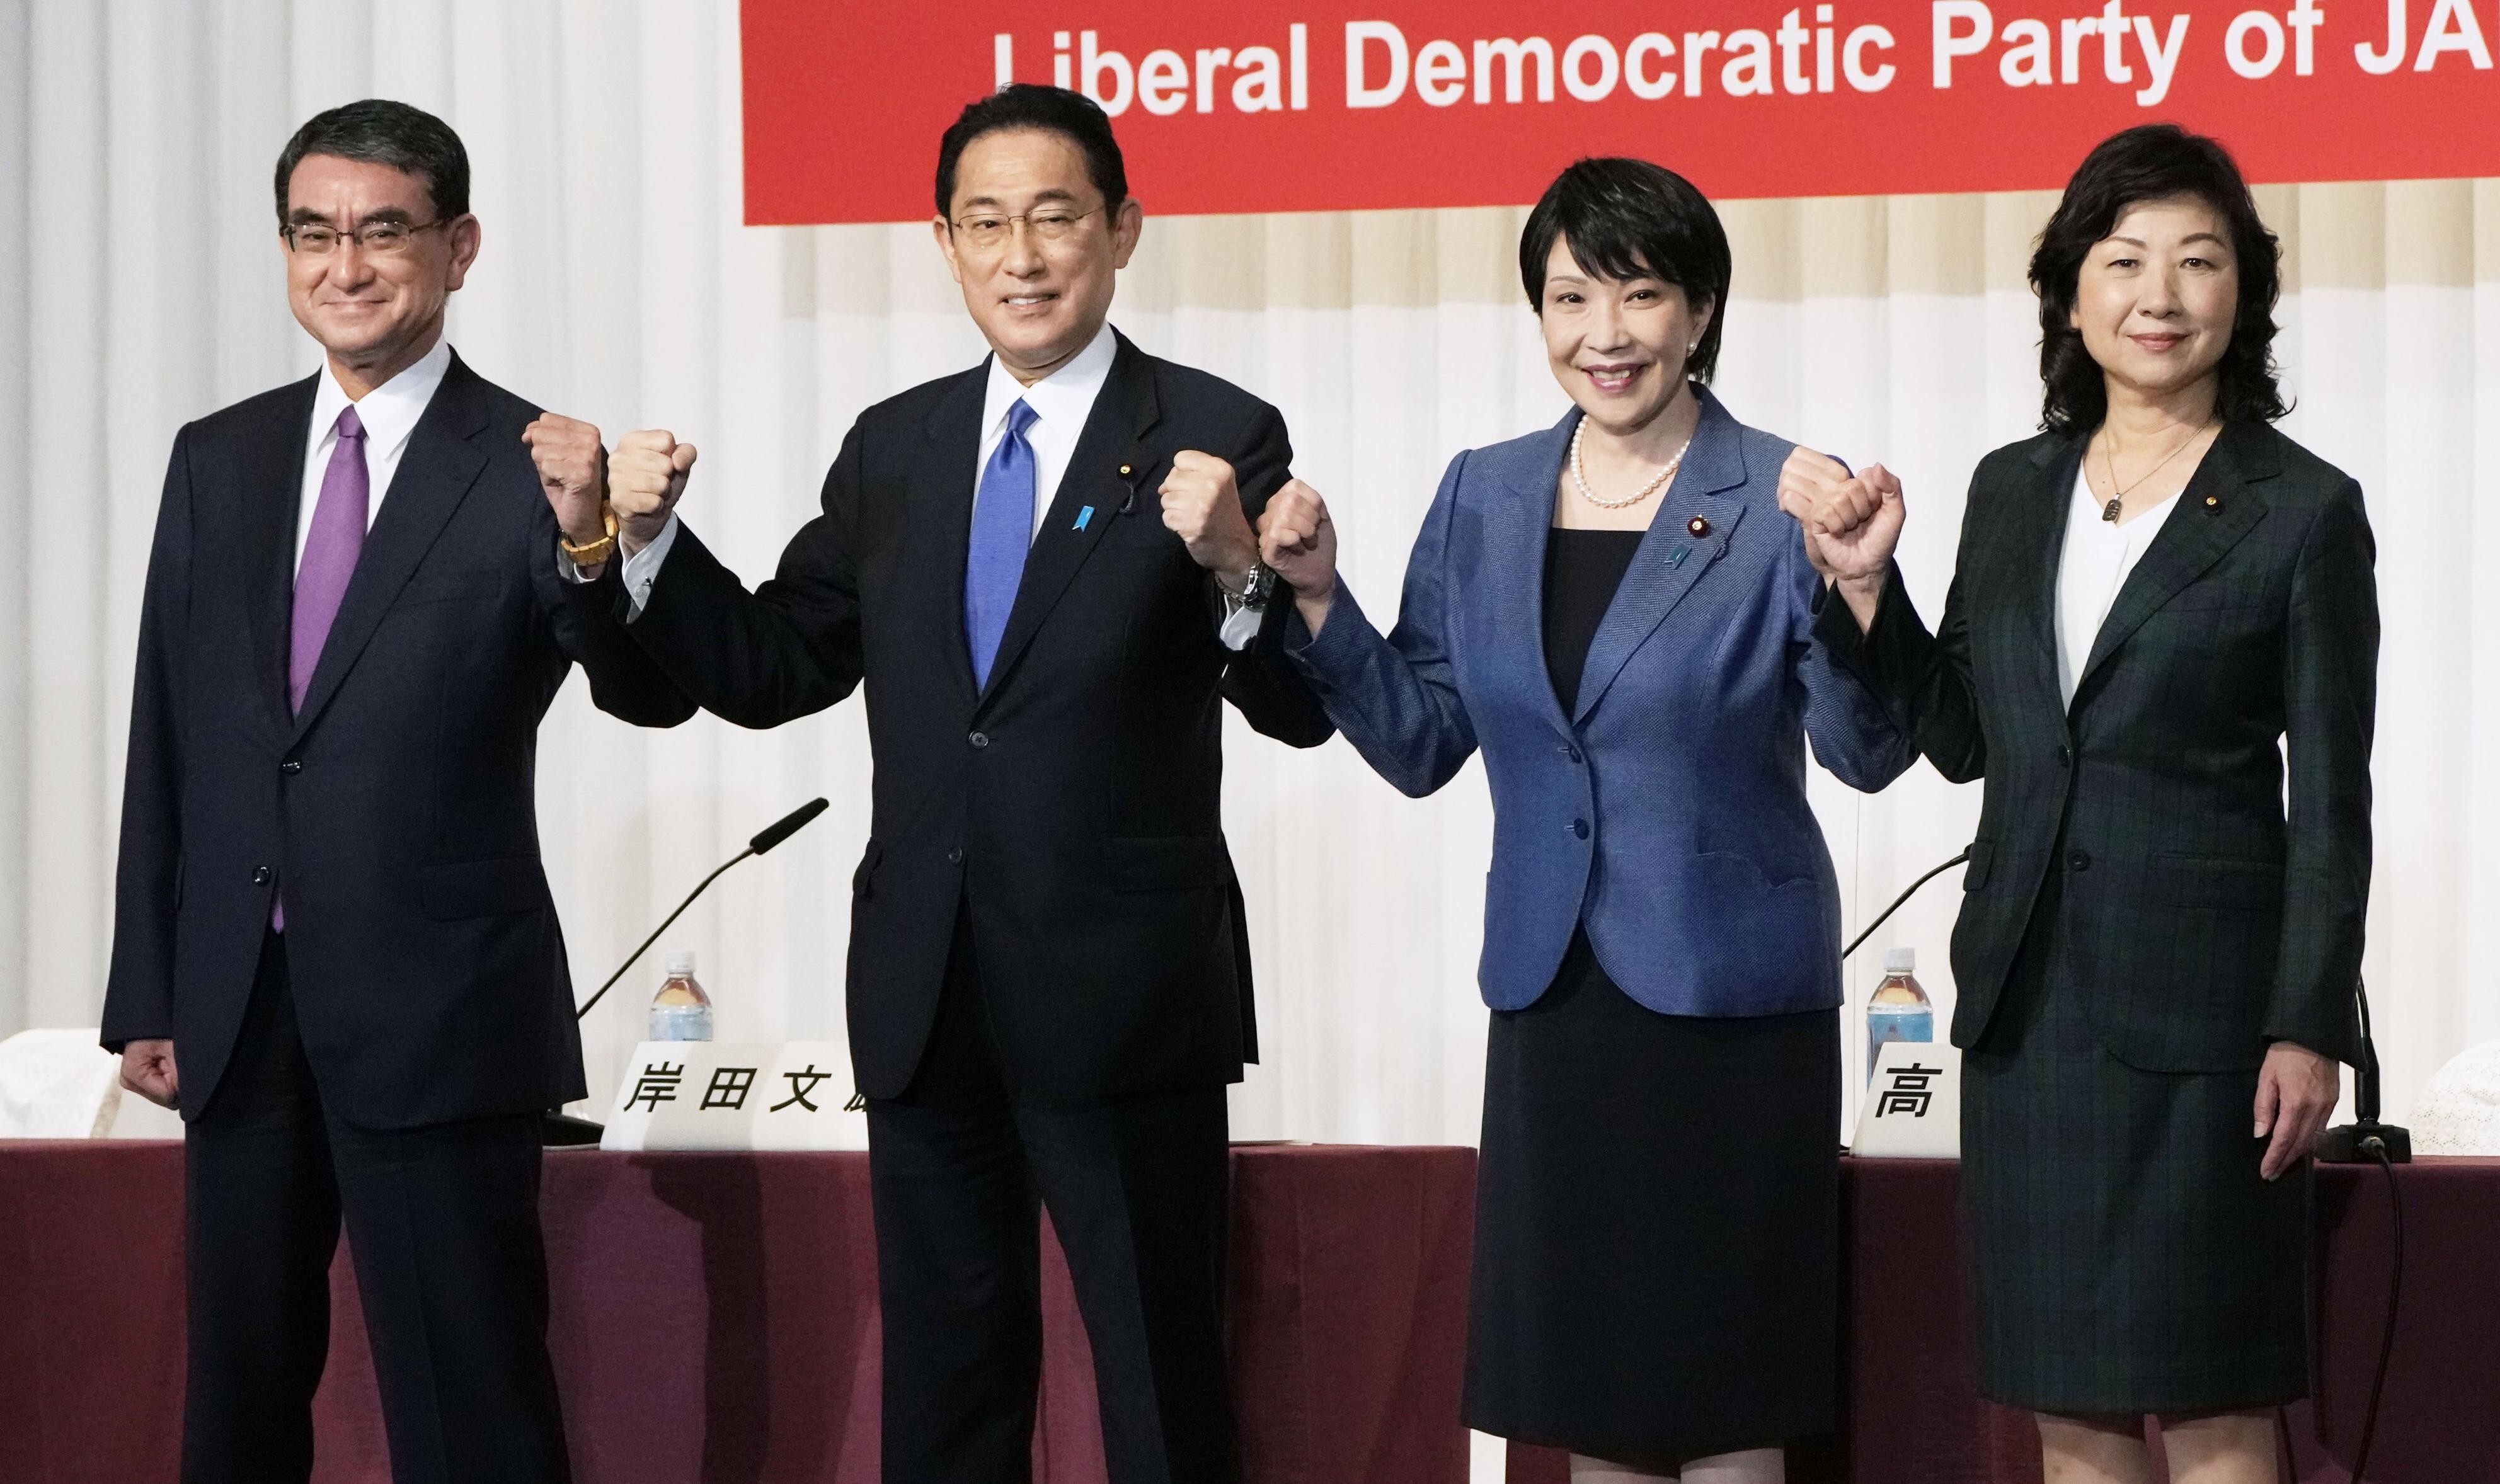 The four candidates running in the presidential election of Japan’s ruling party, (from left) Taro Kono, Fumio Kishida, Sanae Takaichi and Seiko Noda, at a press conference in Tokyo on Friday. Photo: Kyodo